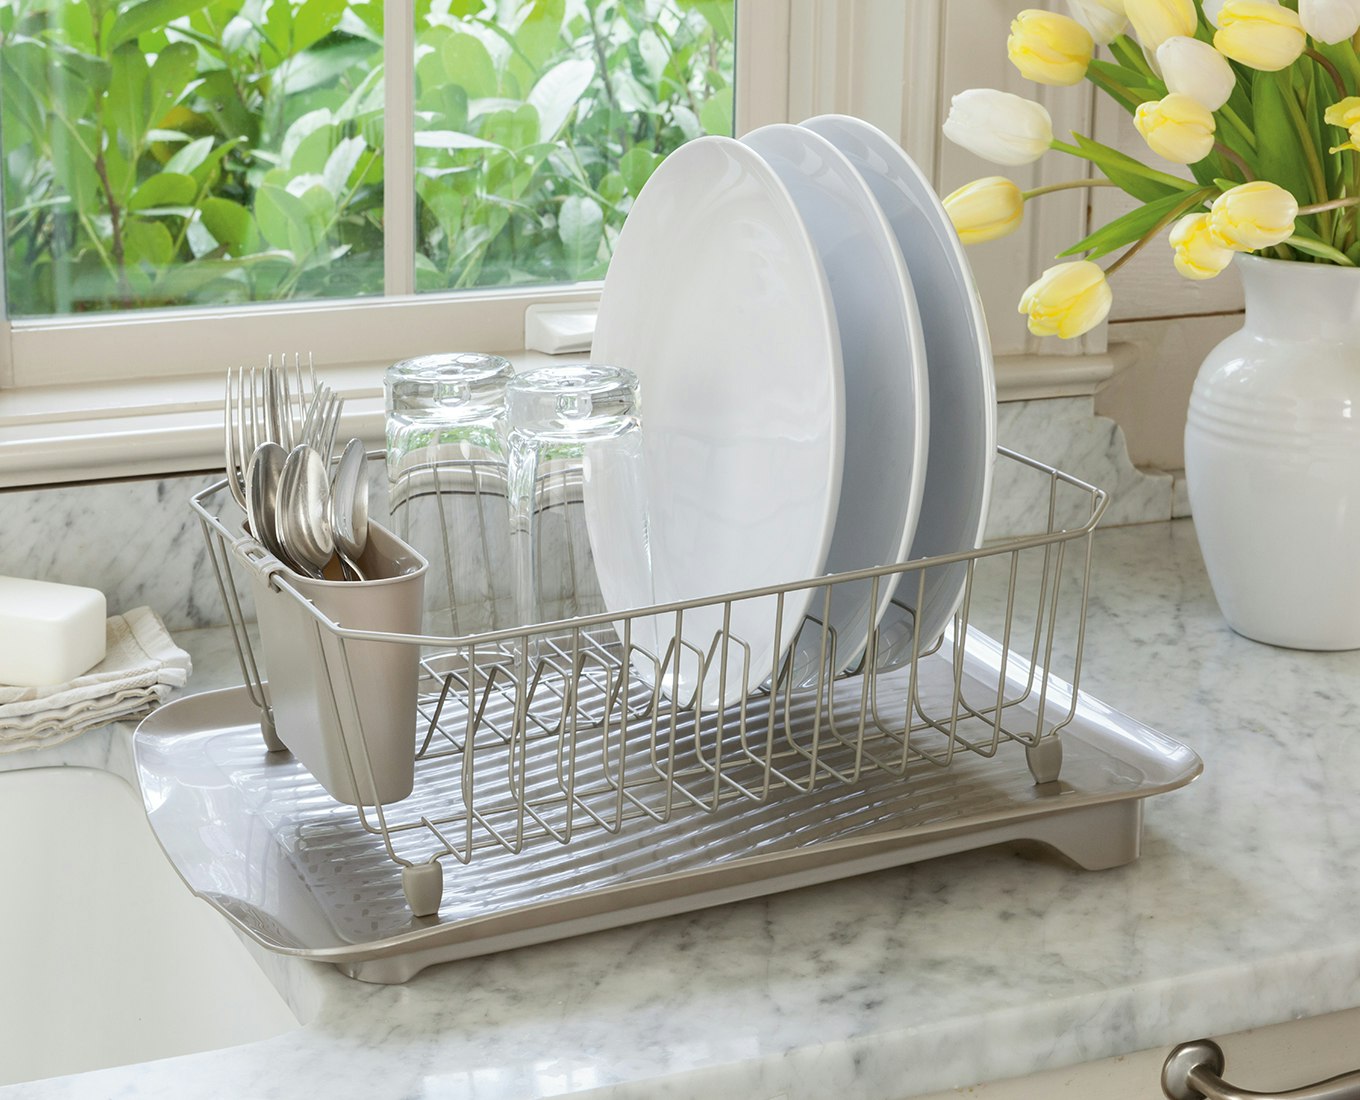 image of rubbermaid dish drainer next to sink